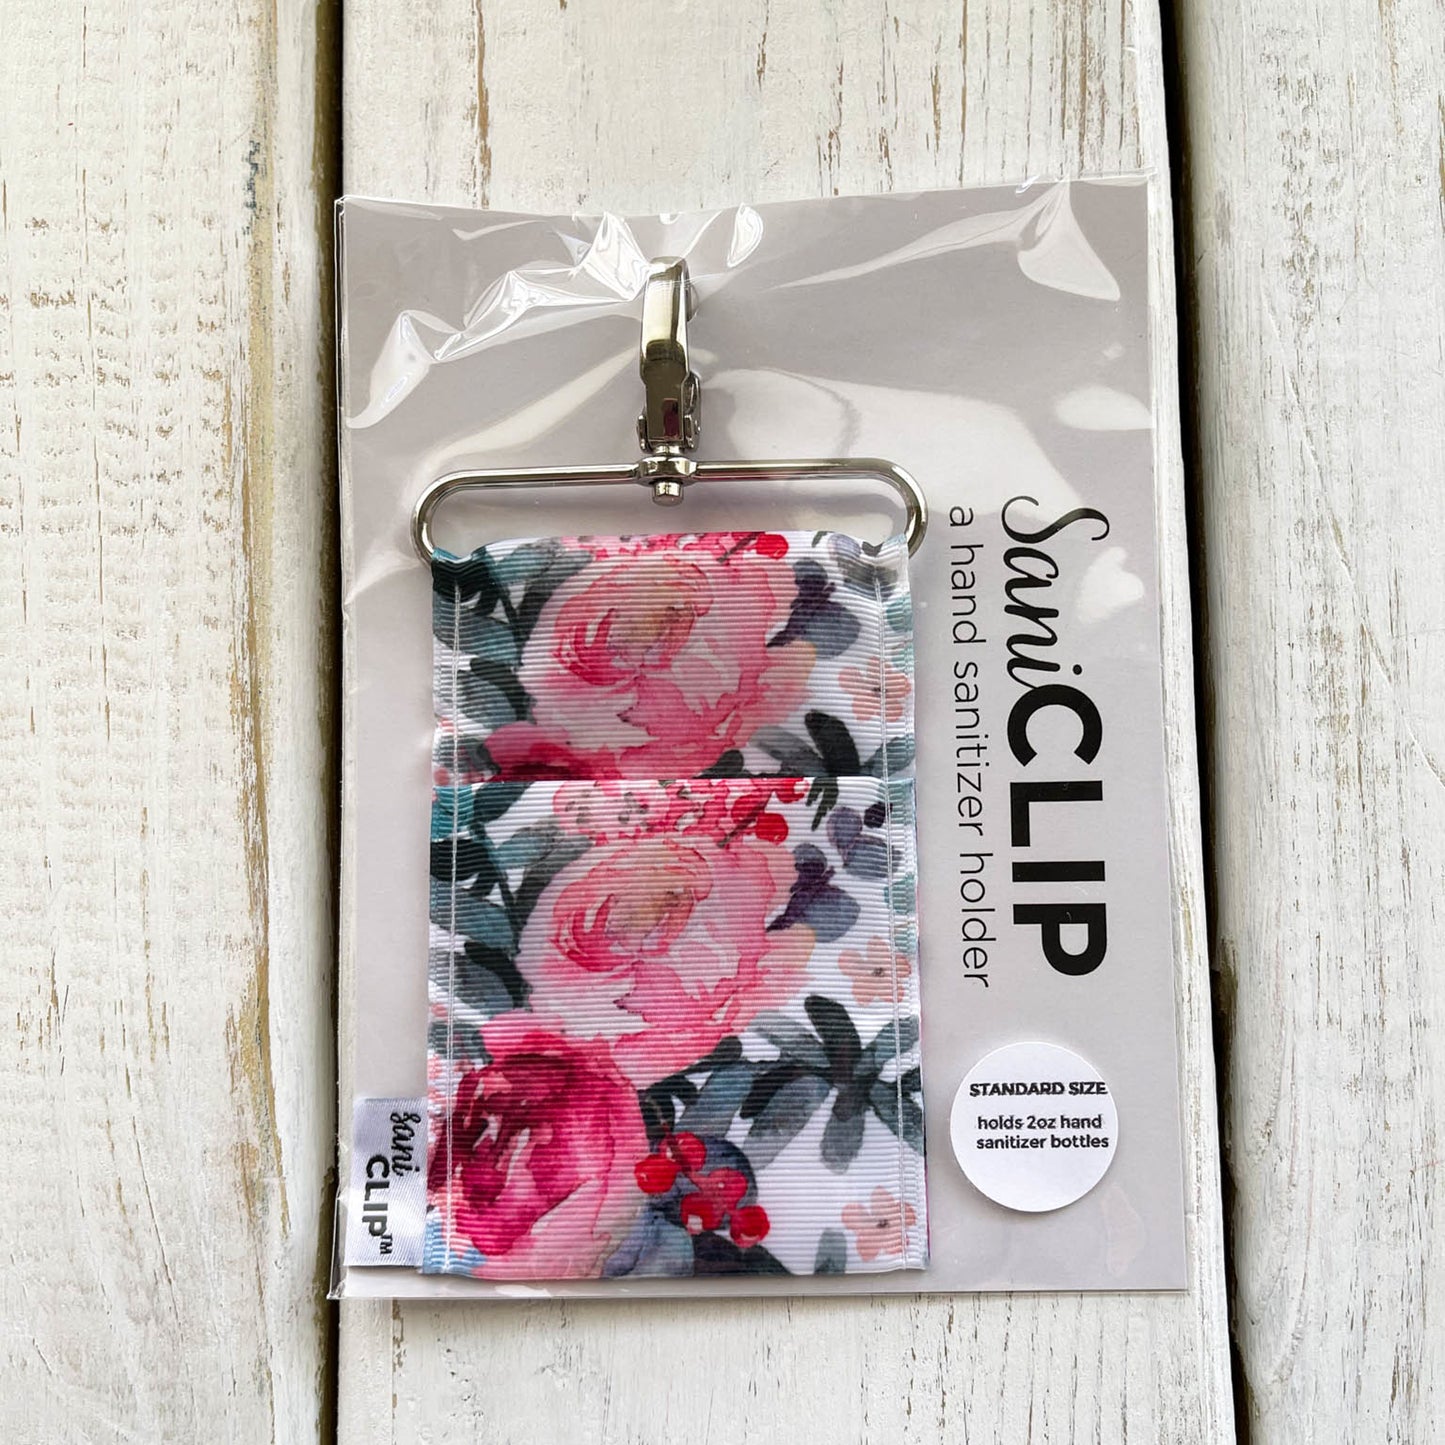 Lip Balm and Sanitizer Holders - Various Styles